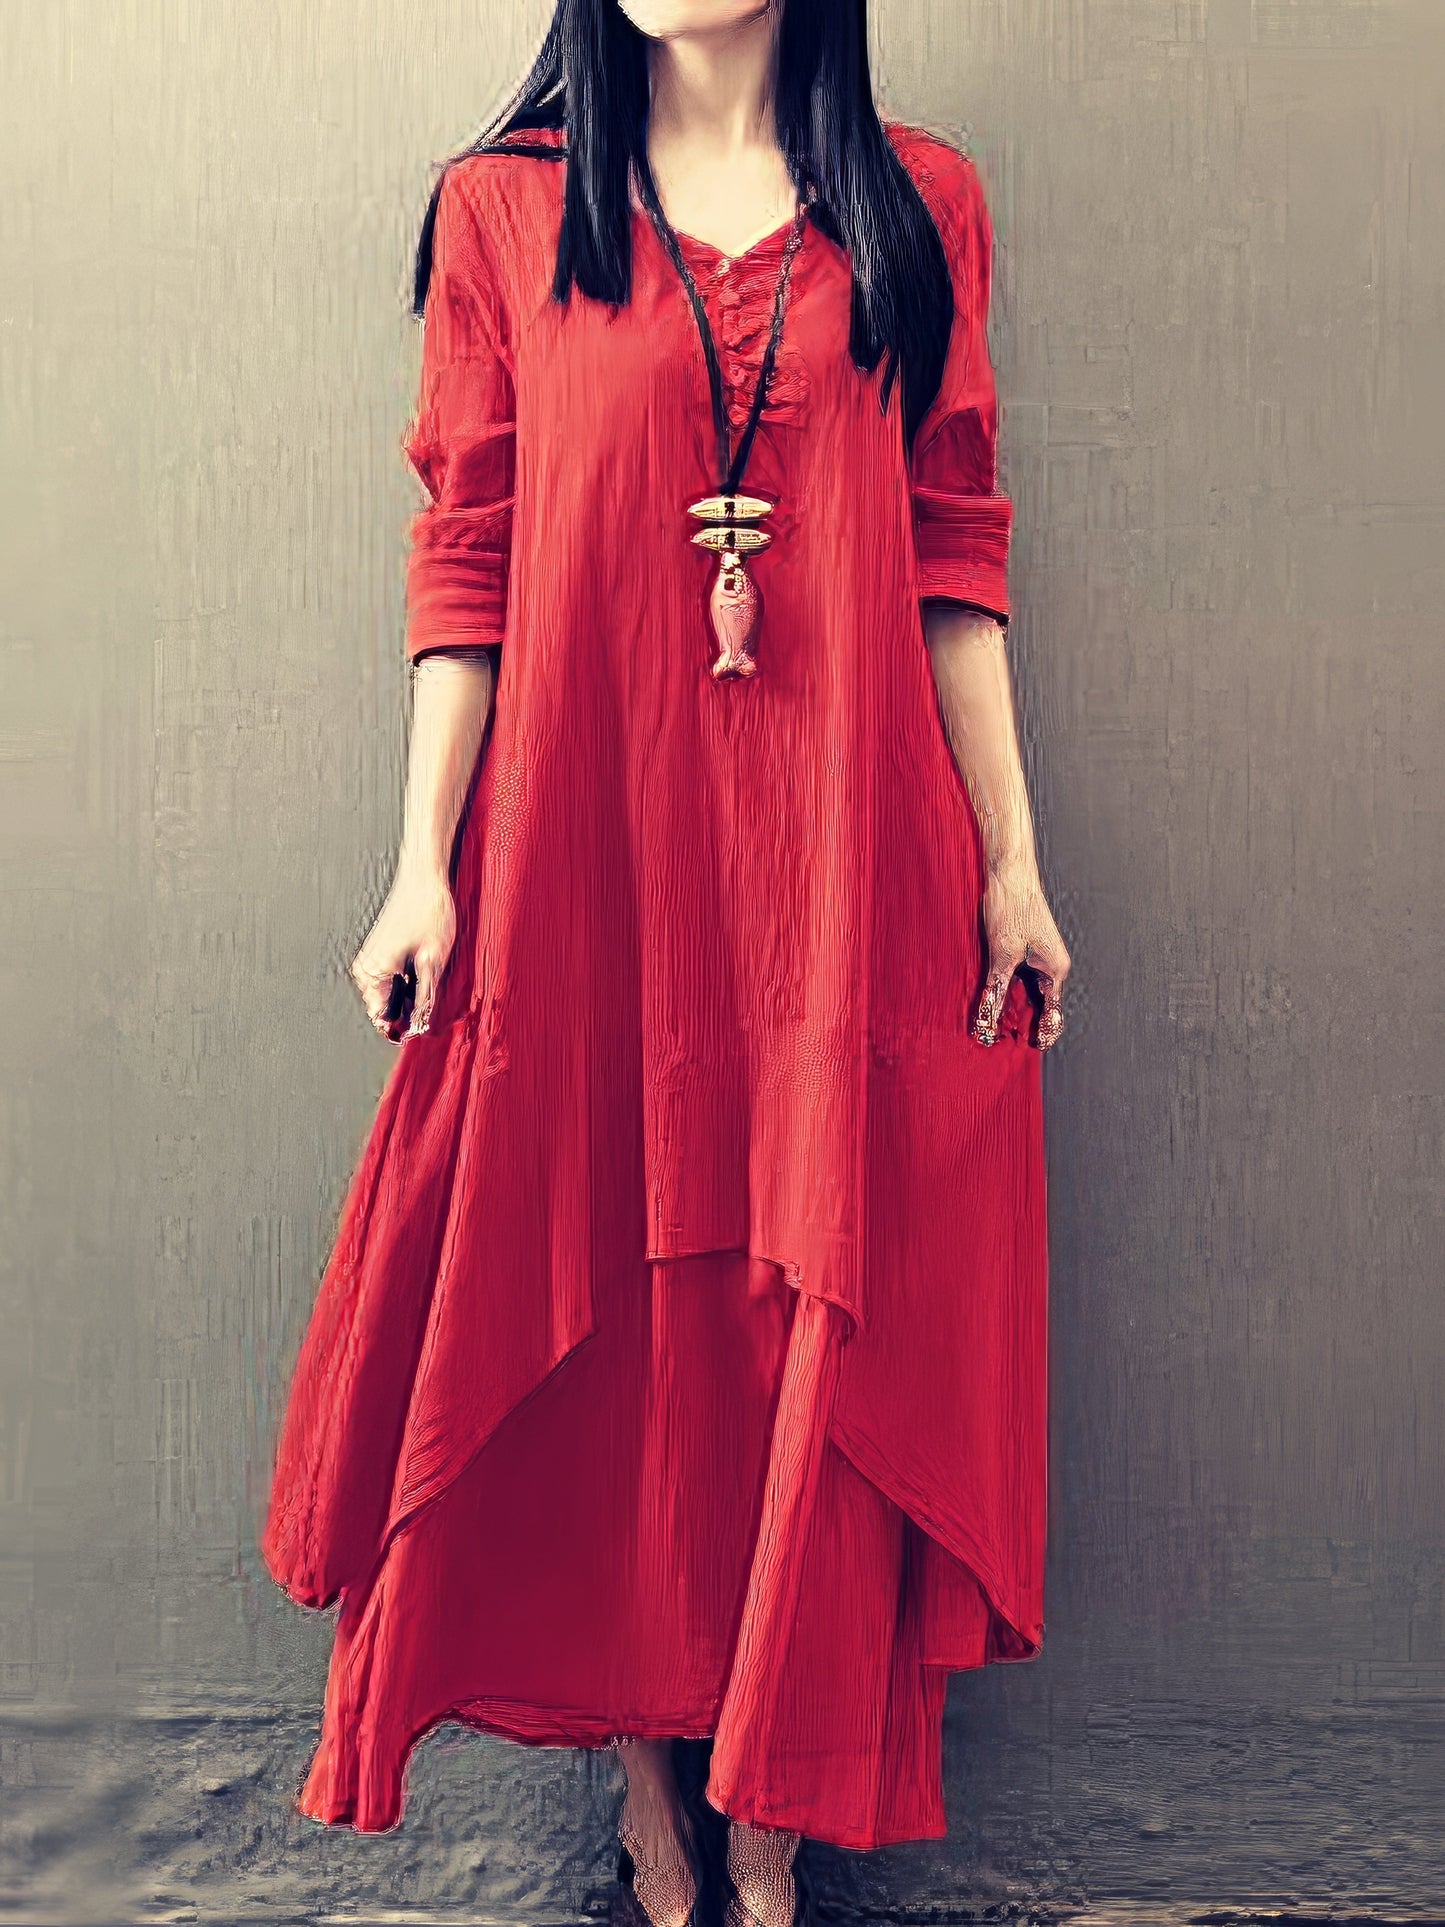 Casual Swing Solid Color Long Sleeve Button Fake V Neck Basic Maxi Dress